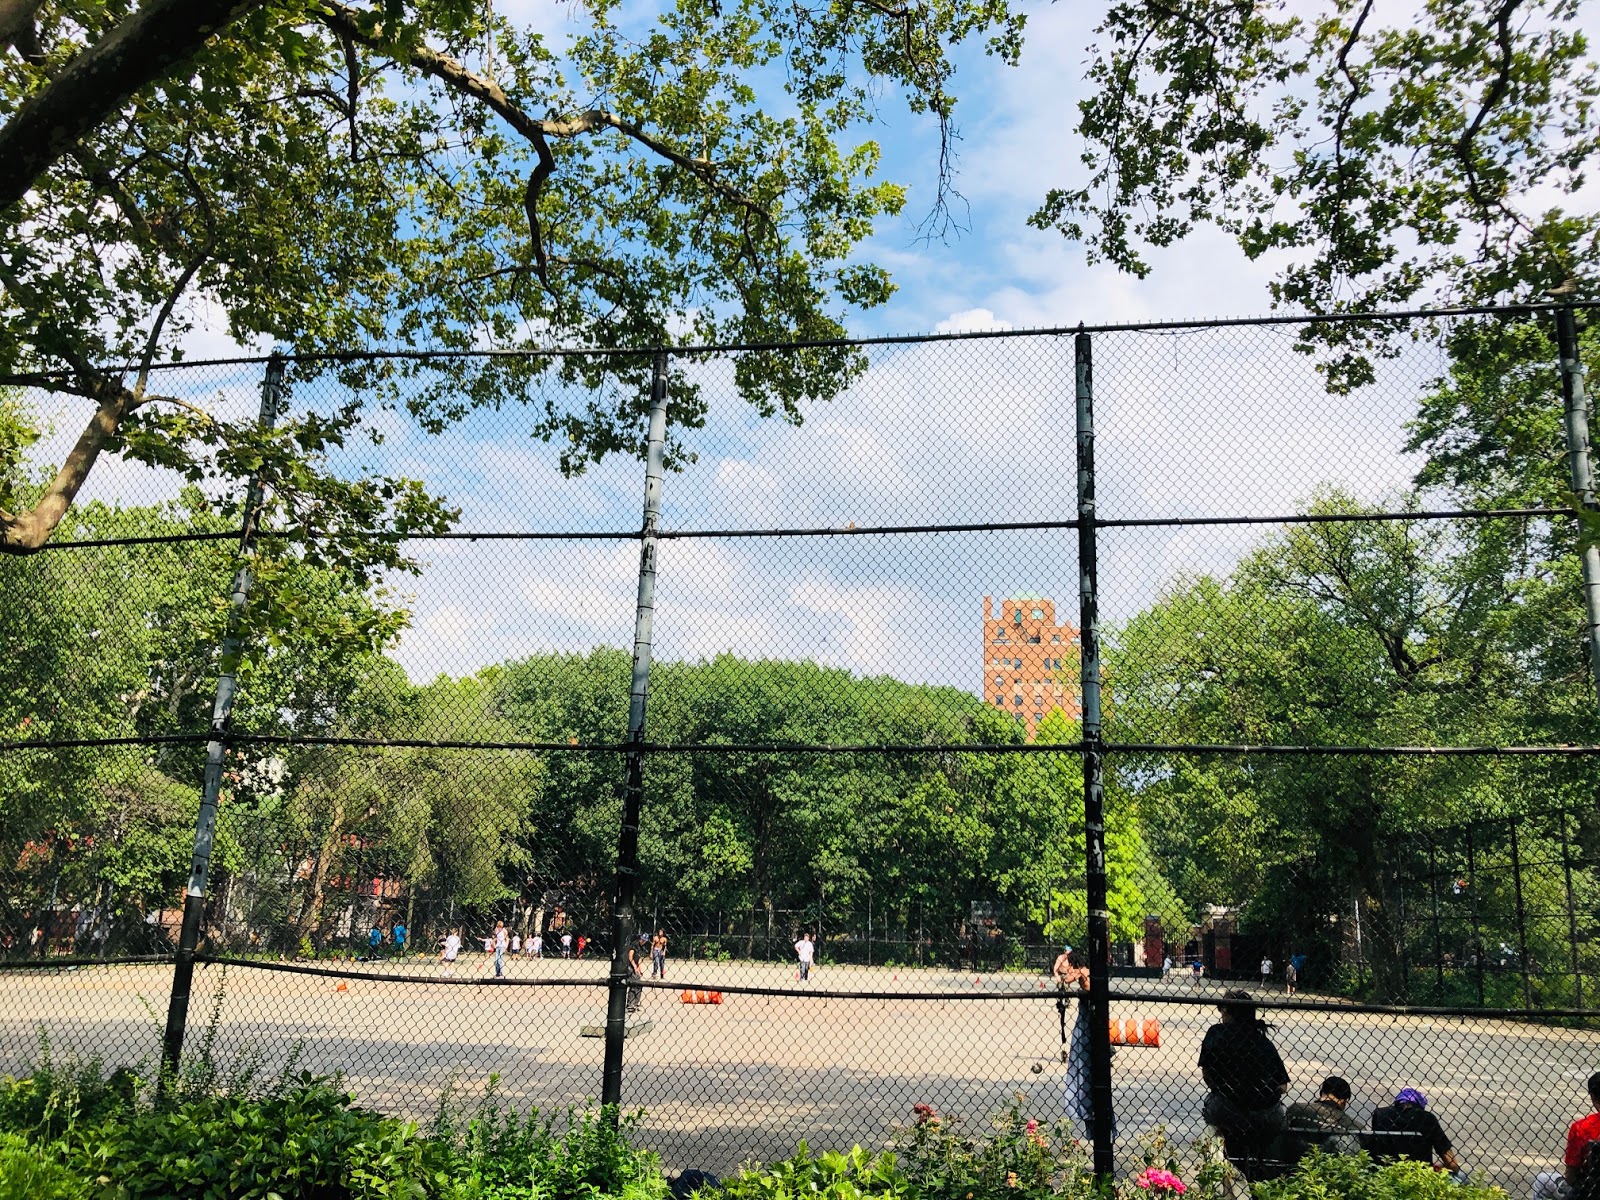 Ev Grieve Breaking Parks Officials Say They Will Not Be Putting Down A Synthetic Turf In Tompkins Square Park Skateboarders Rejoice